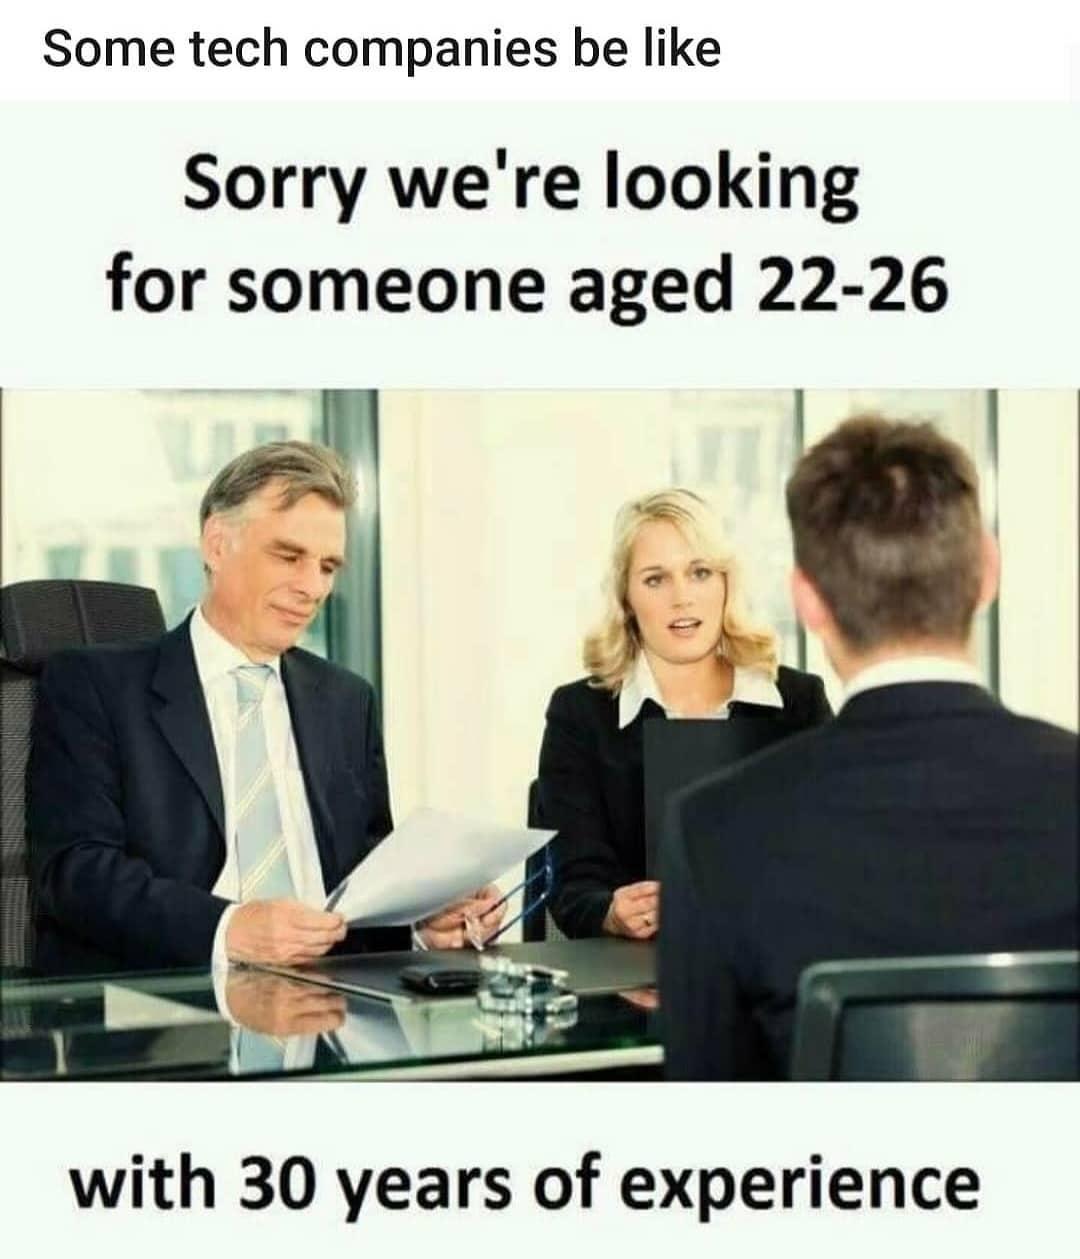 funny memes - job interview meme funny - Some tech companies be Sorry we're looking for someone aged 2226 with 30 years of experience